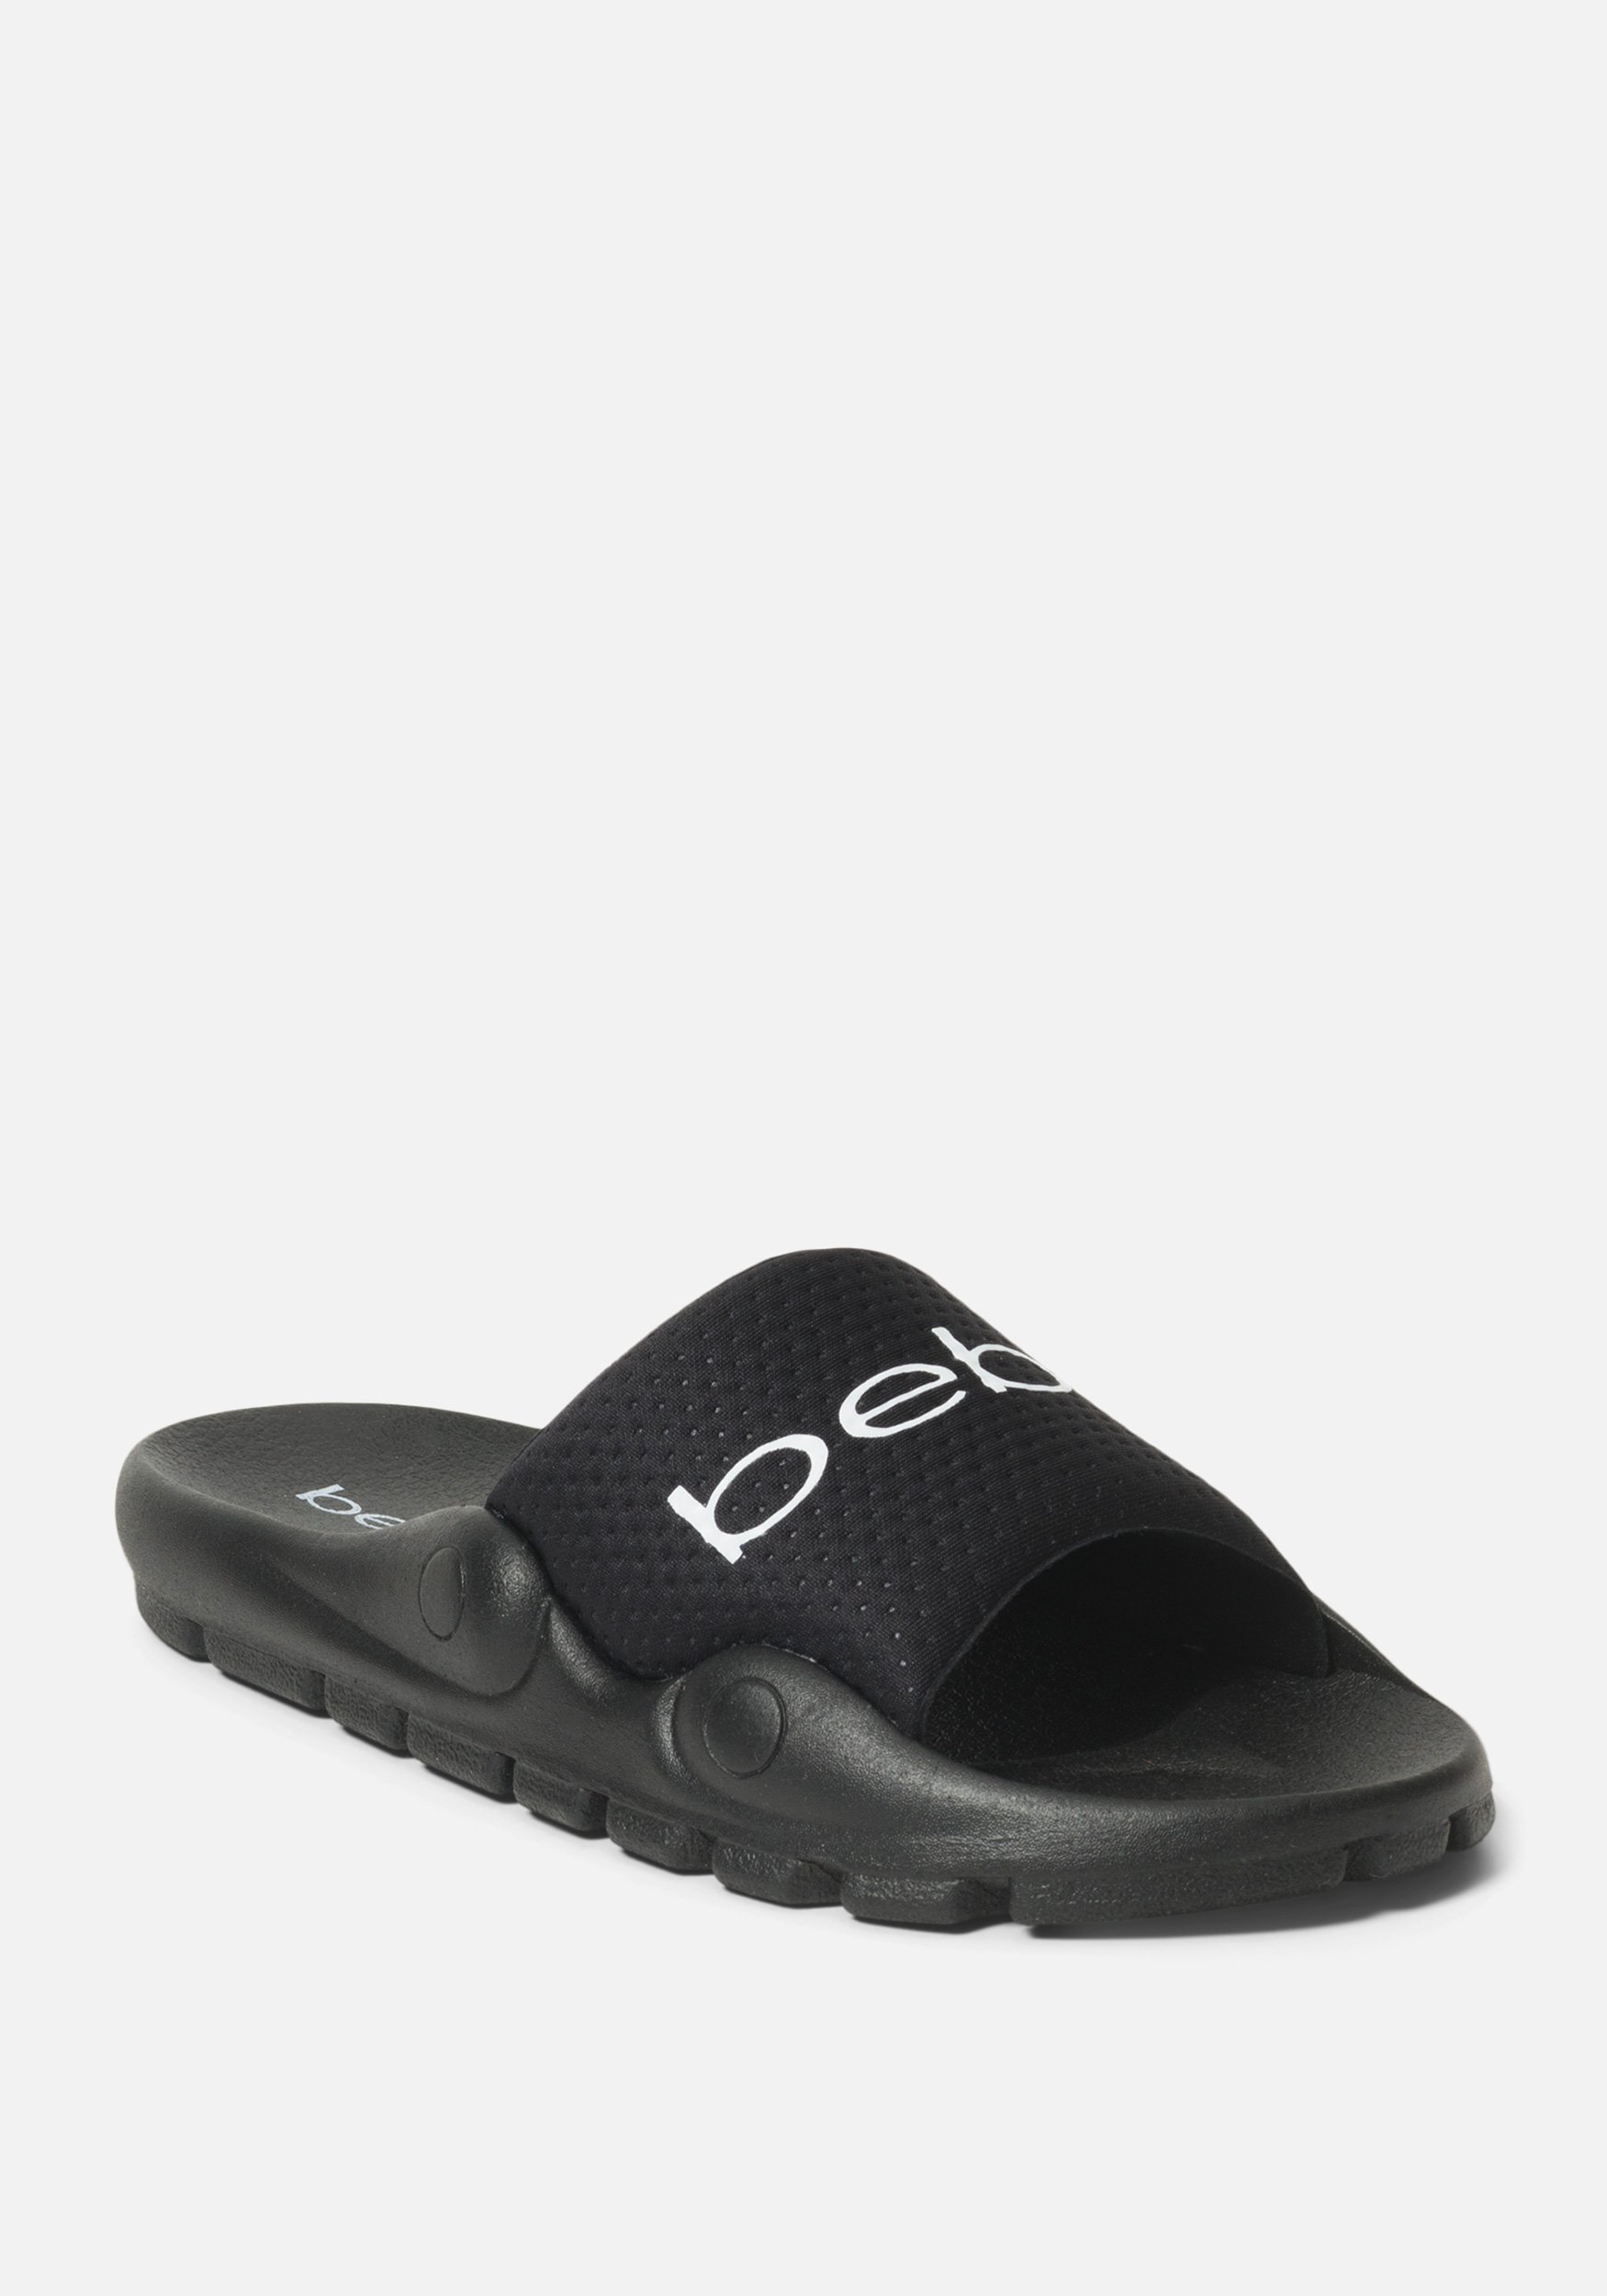 Bebe Women's Nayomie Sporty Slides Shoe, Size 10 in BLACK Synthetic